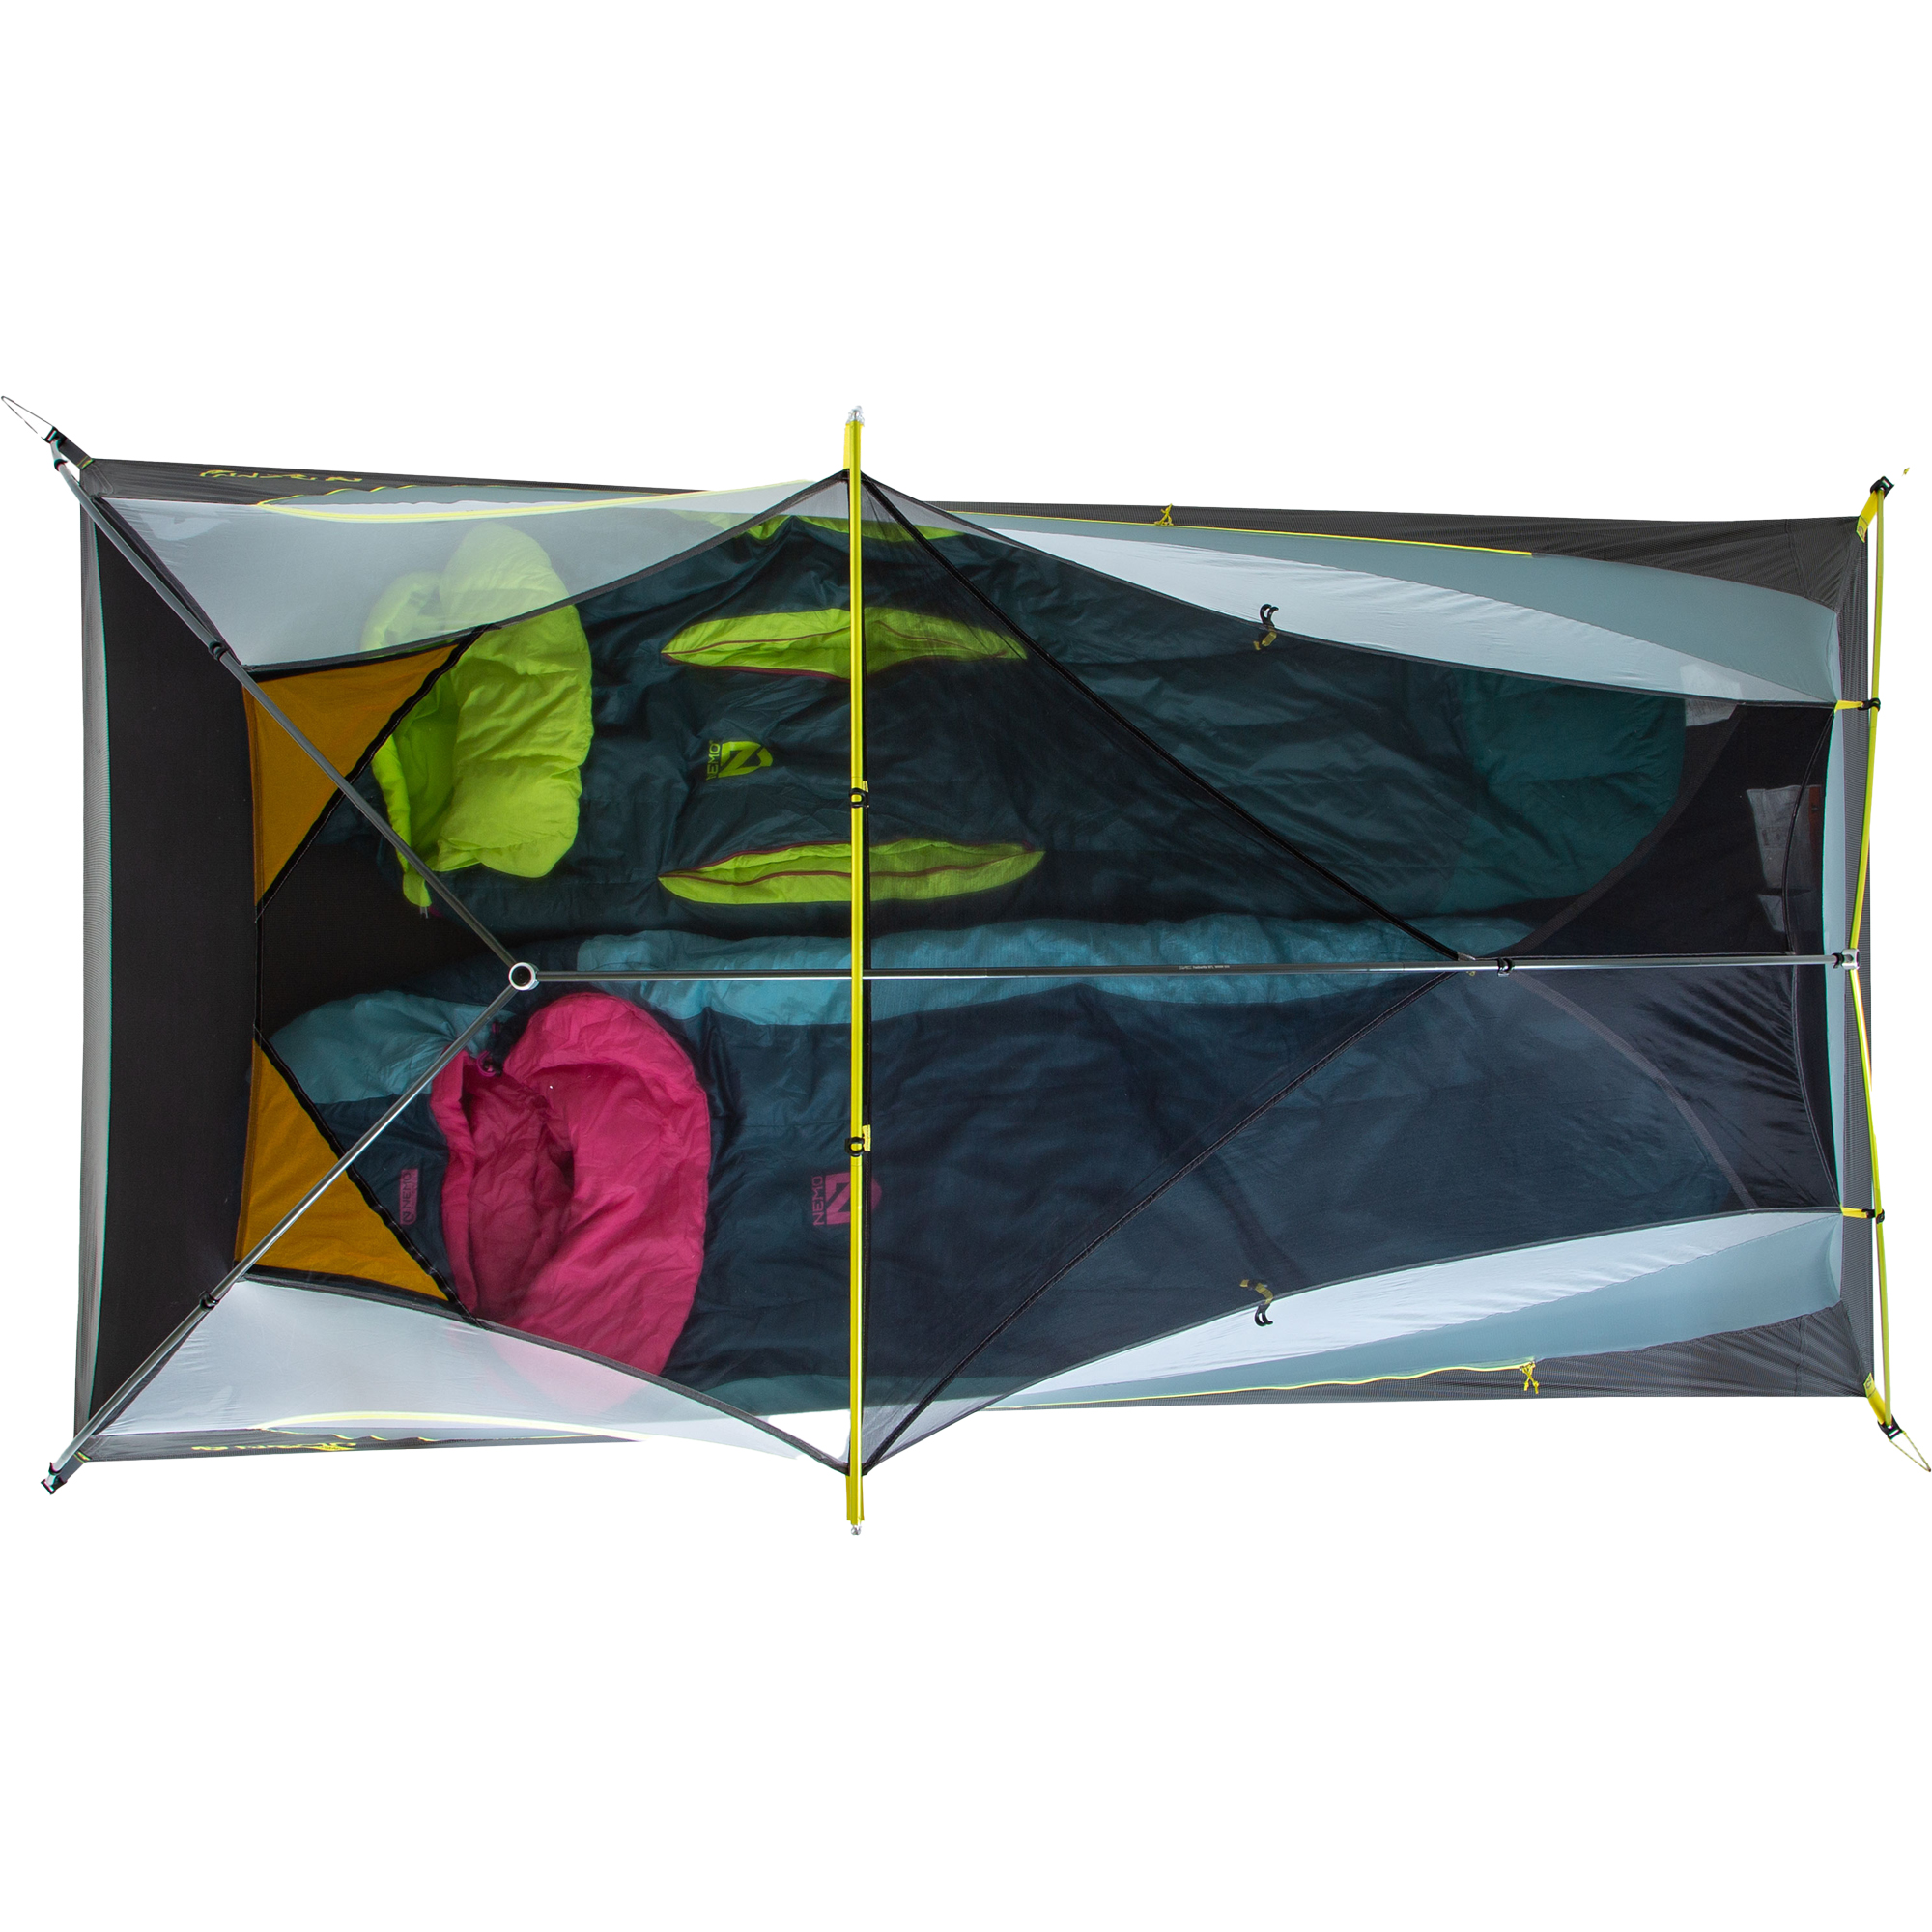 Nemo Dragonfly OSMO 2 Ultralight Backpacking Tent